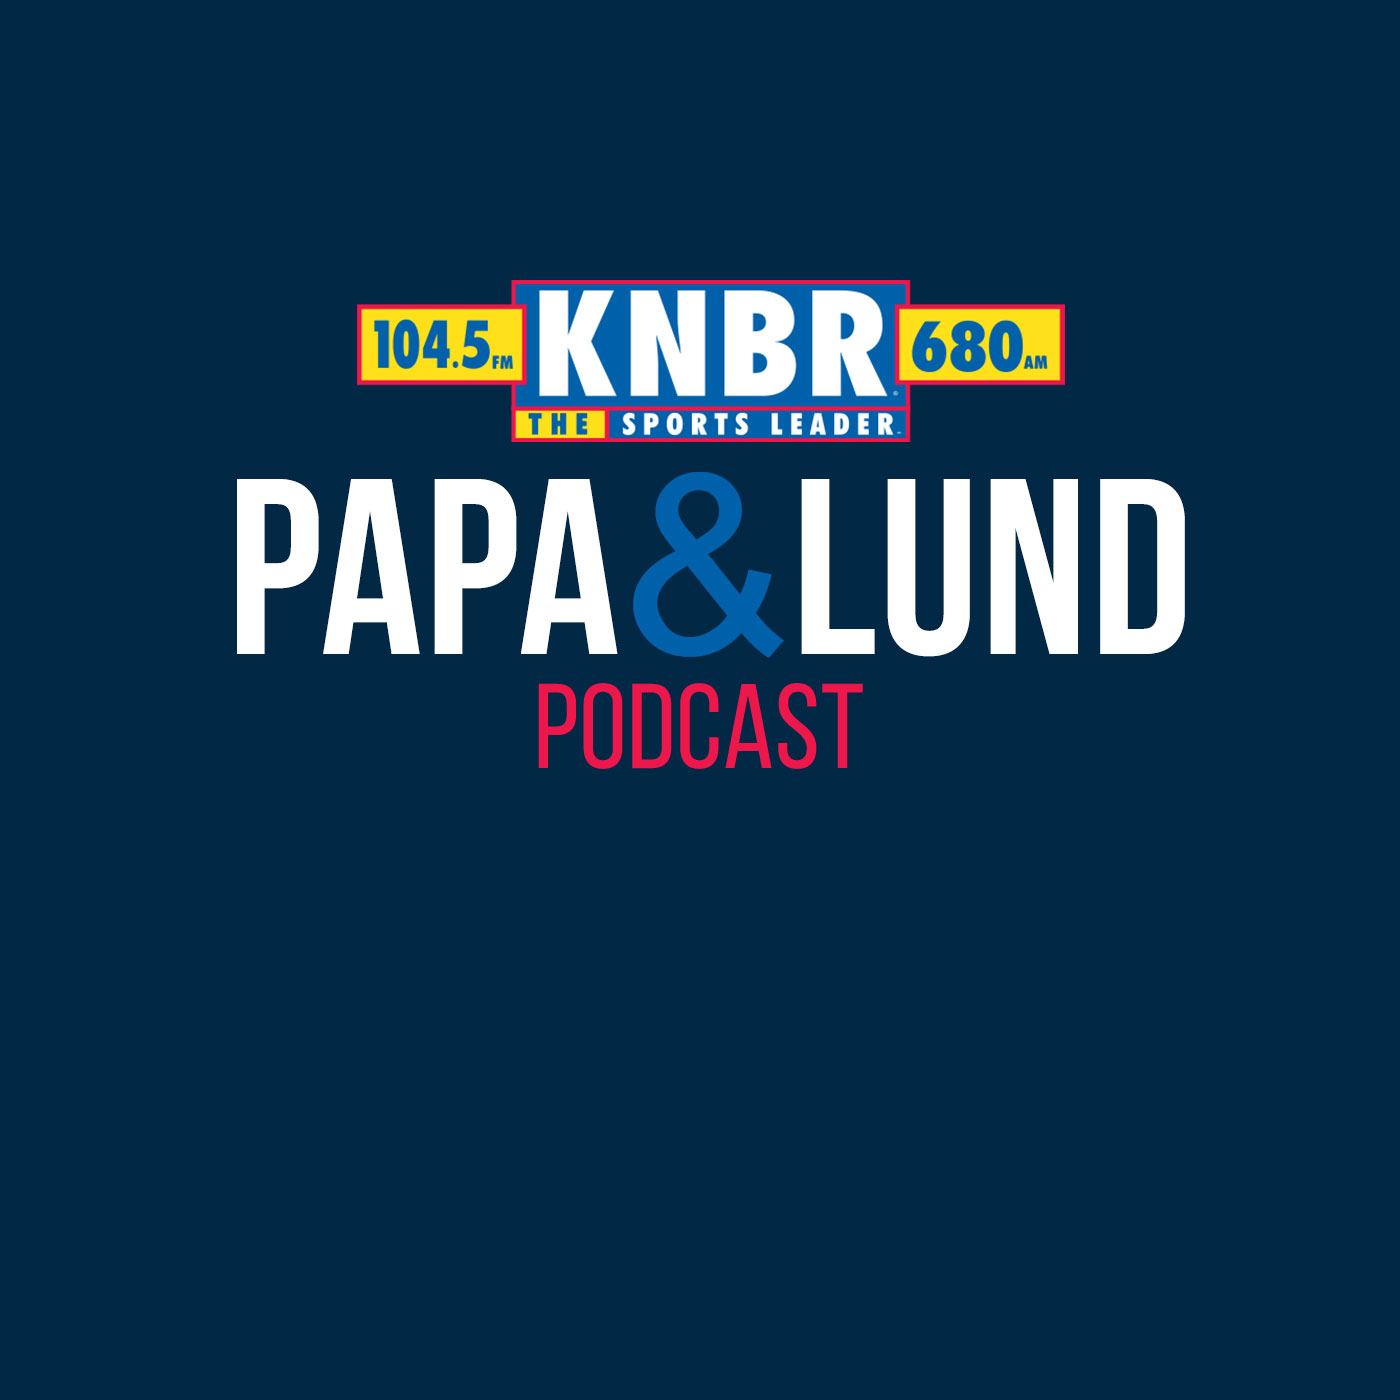 11-9 David Lombardi joins Papa & Lund to discuss where the 49ers are with OBJ and what we learned from the 49ers after a tough Week 9 loss to the Cardinals